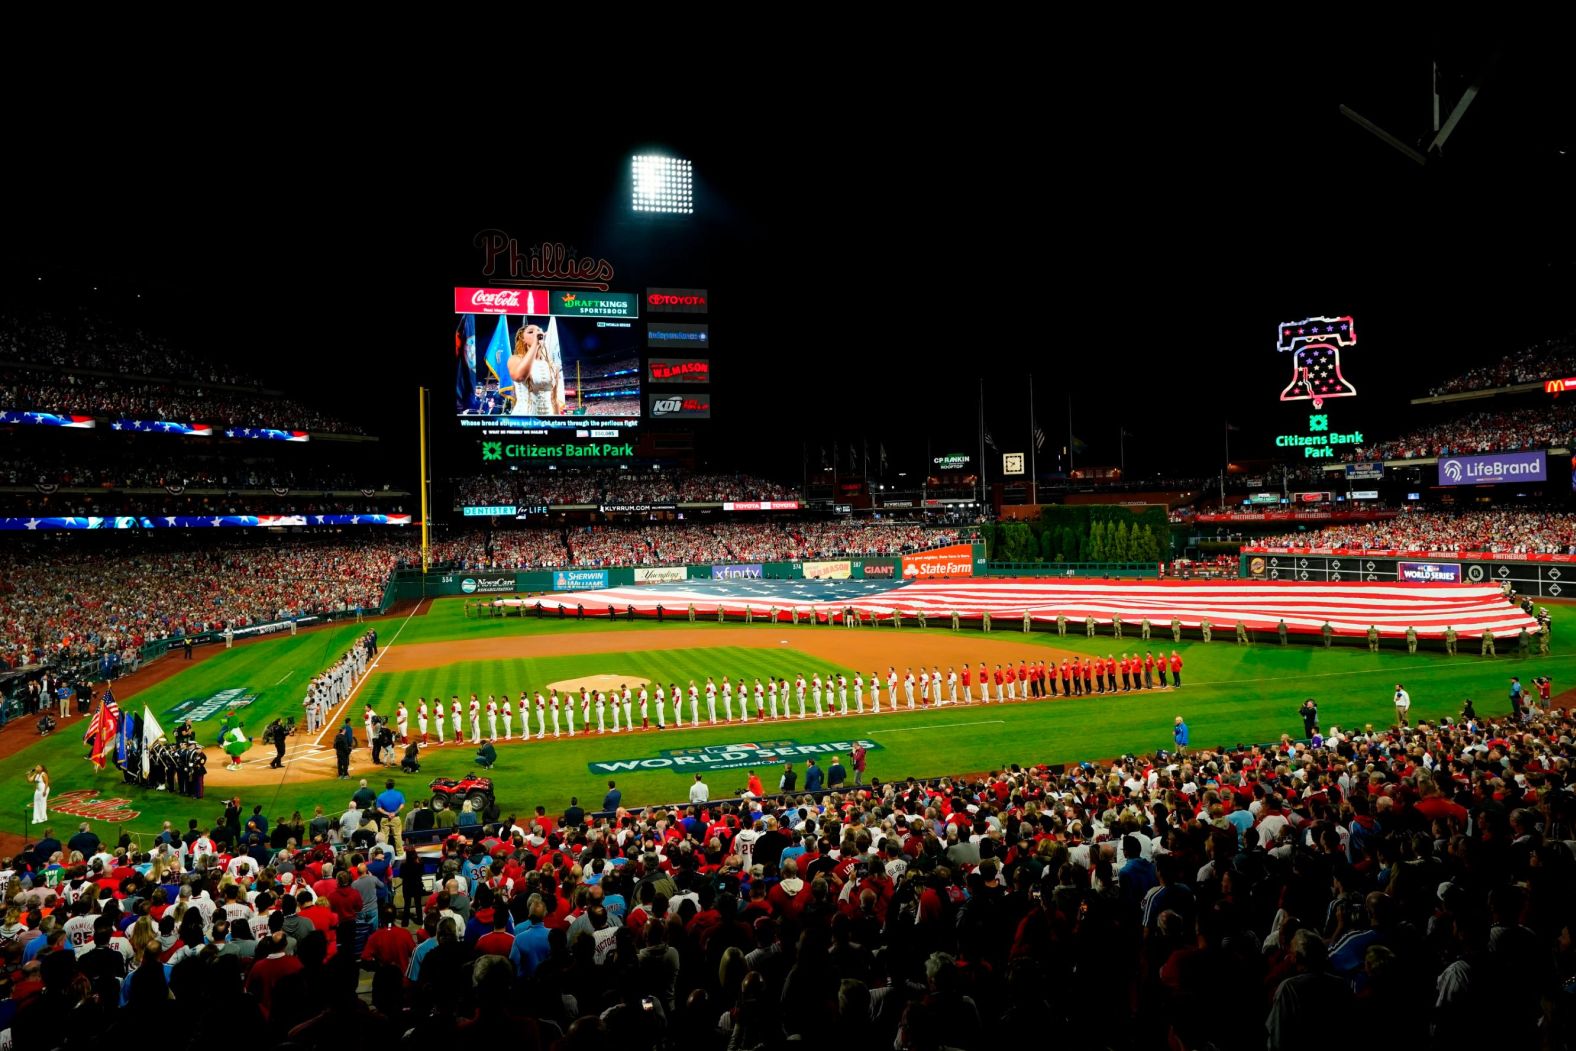 Players line up for the National Anthem before Game 3. It was the first World Series game in Philadelphia since 2009.